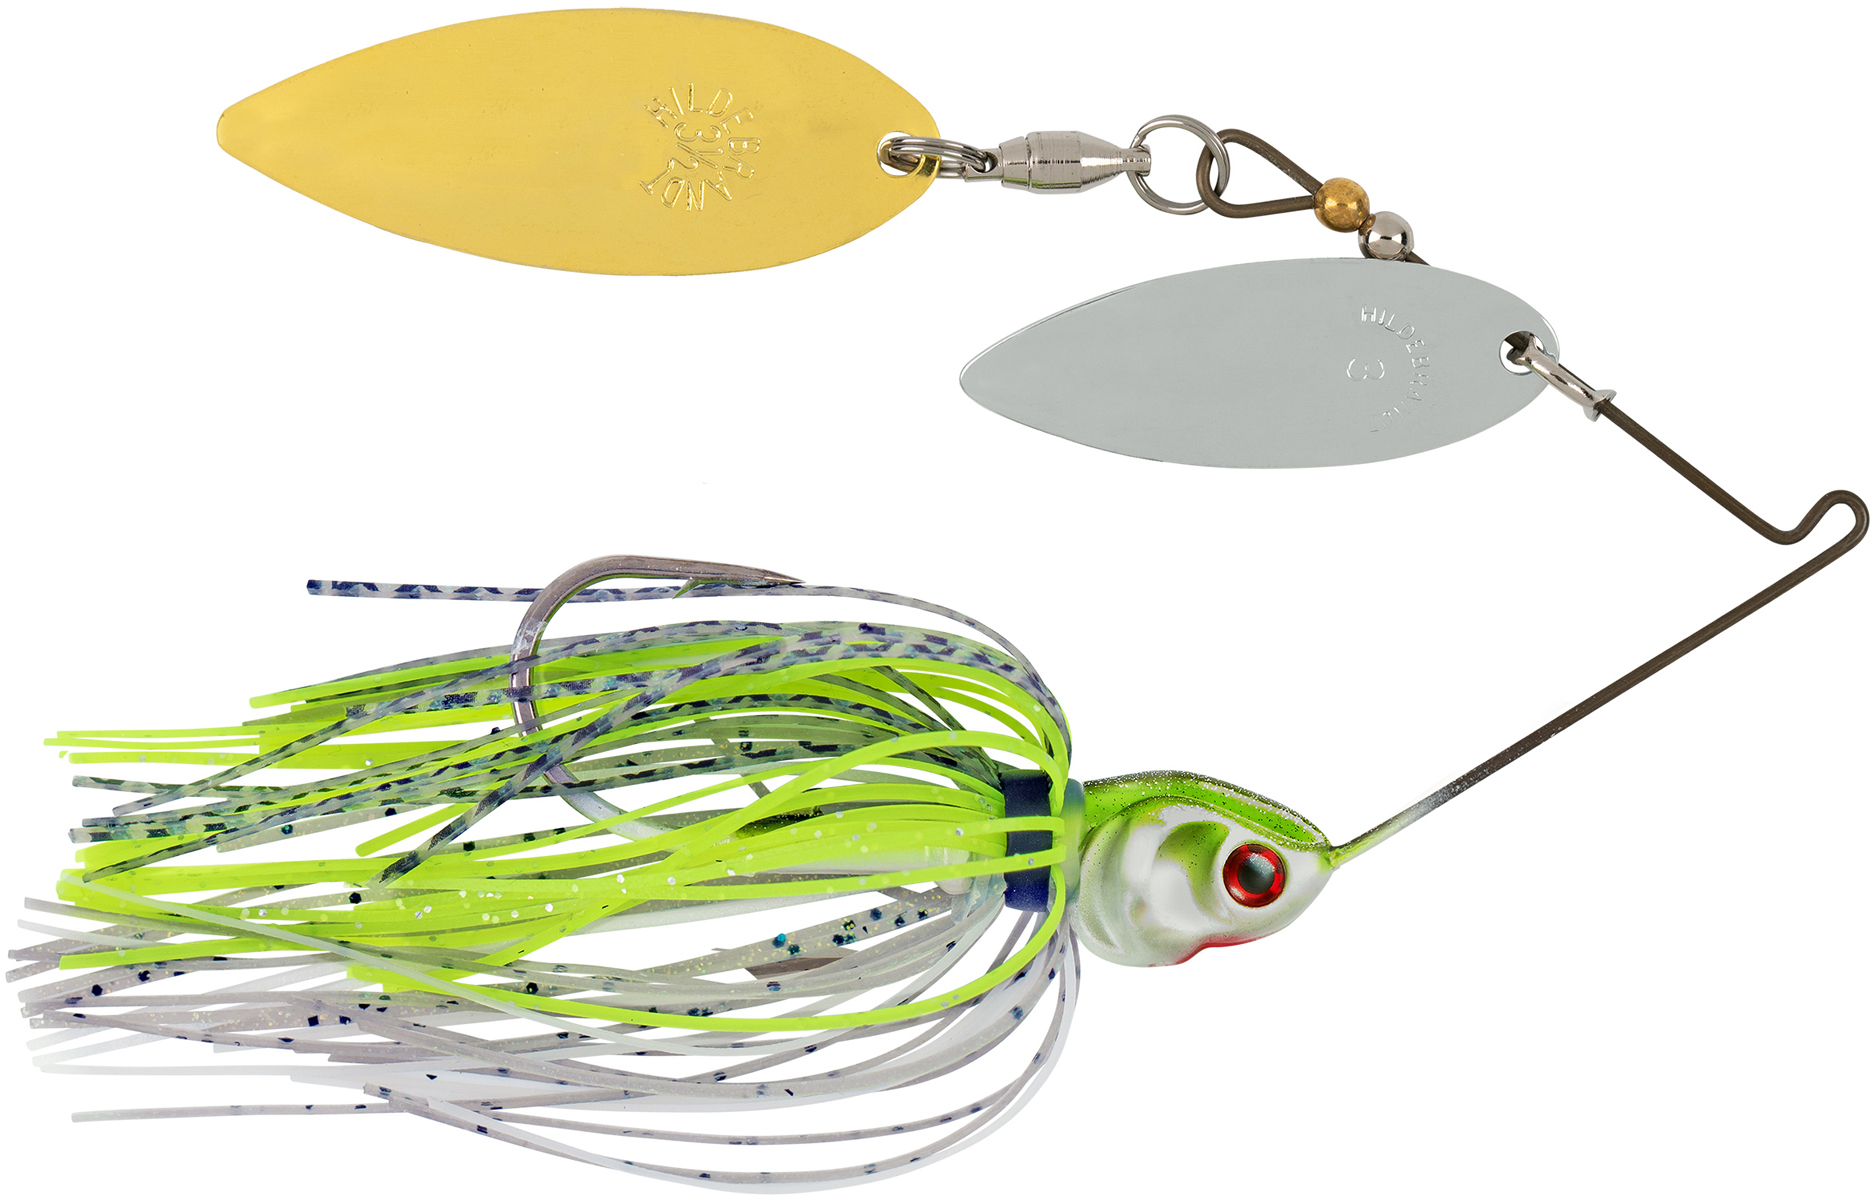 https://op1.0ps.us/original/opplanet-booyah-covert-finesse-spinnerbait-double-willow-blade-1-2oz-4in-jc-special-bycvf12ngw726-main